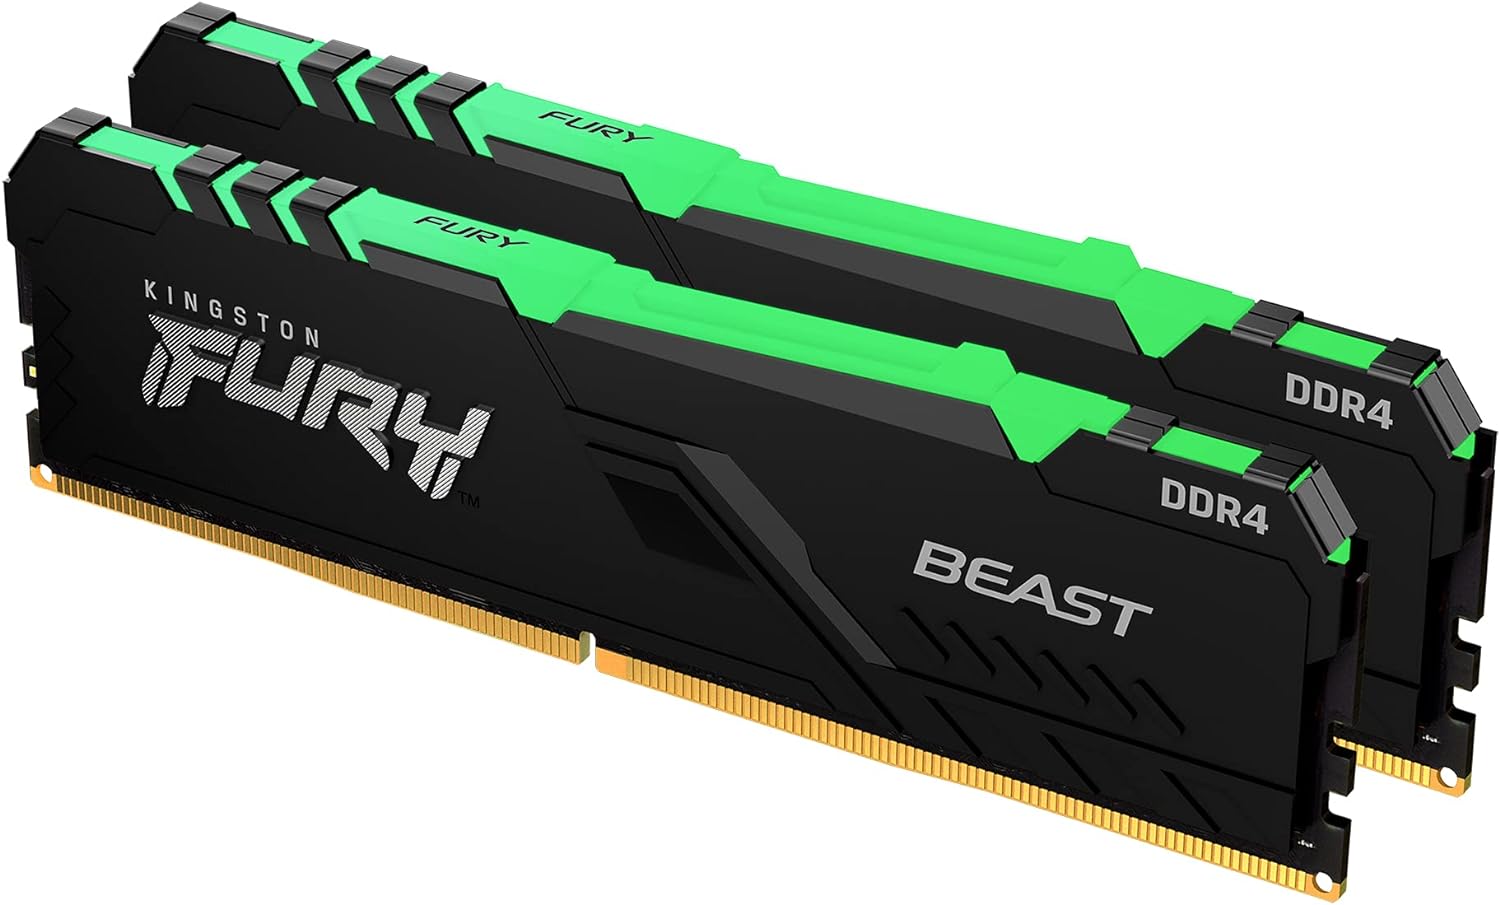 Kingston FURY Beast RGB Memory Module - Enhance your system with 32GB DDR4 3600MHz RAM for seamless performance. 0740617319057